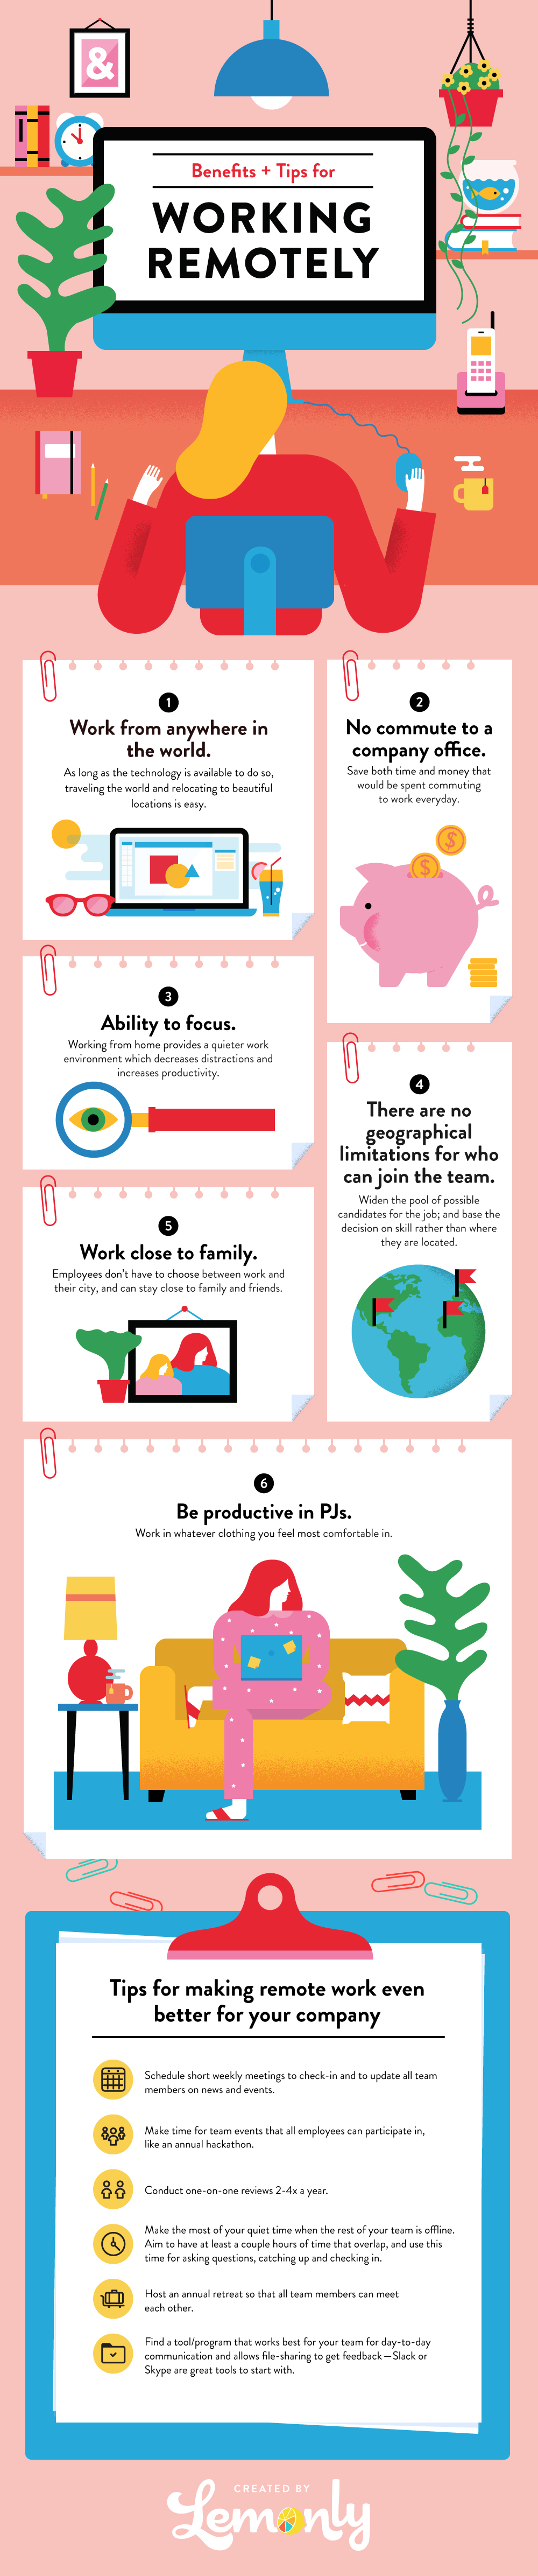 Tips-and-Tricks-for-working-from-home-remote-work-infographic-lemonly